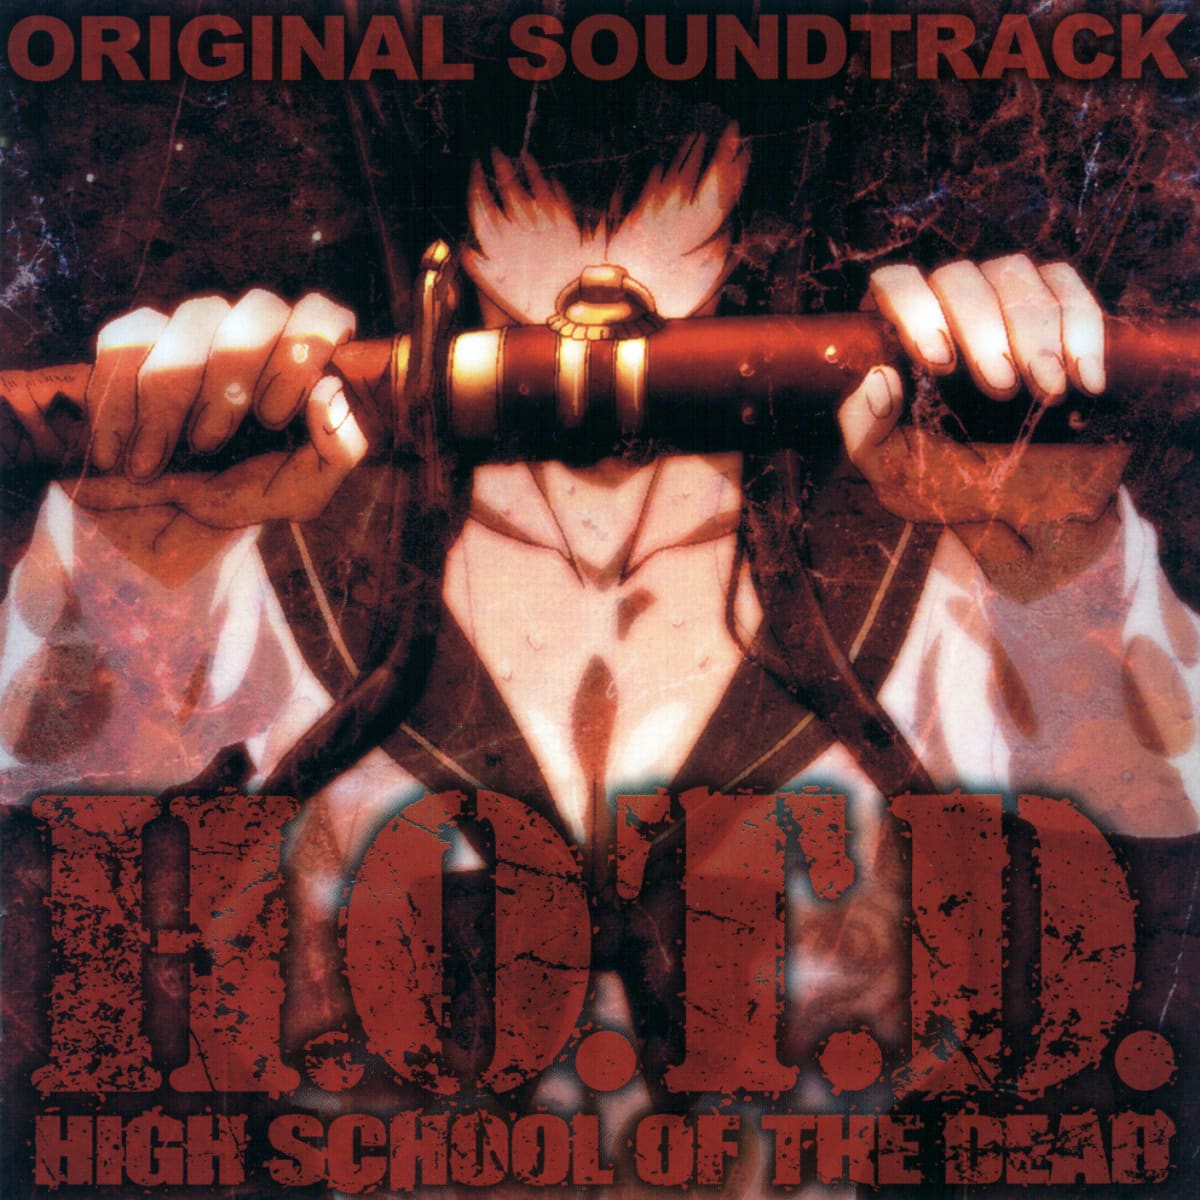 Highschool of the Dead Anime Opening & Ending Theme Songs With Lyrics -  HubPages